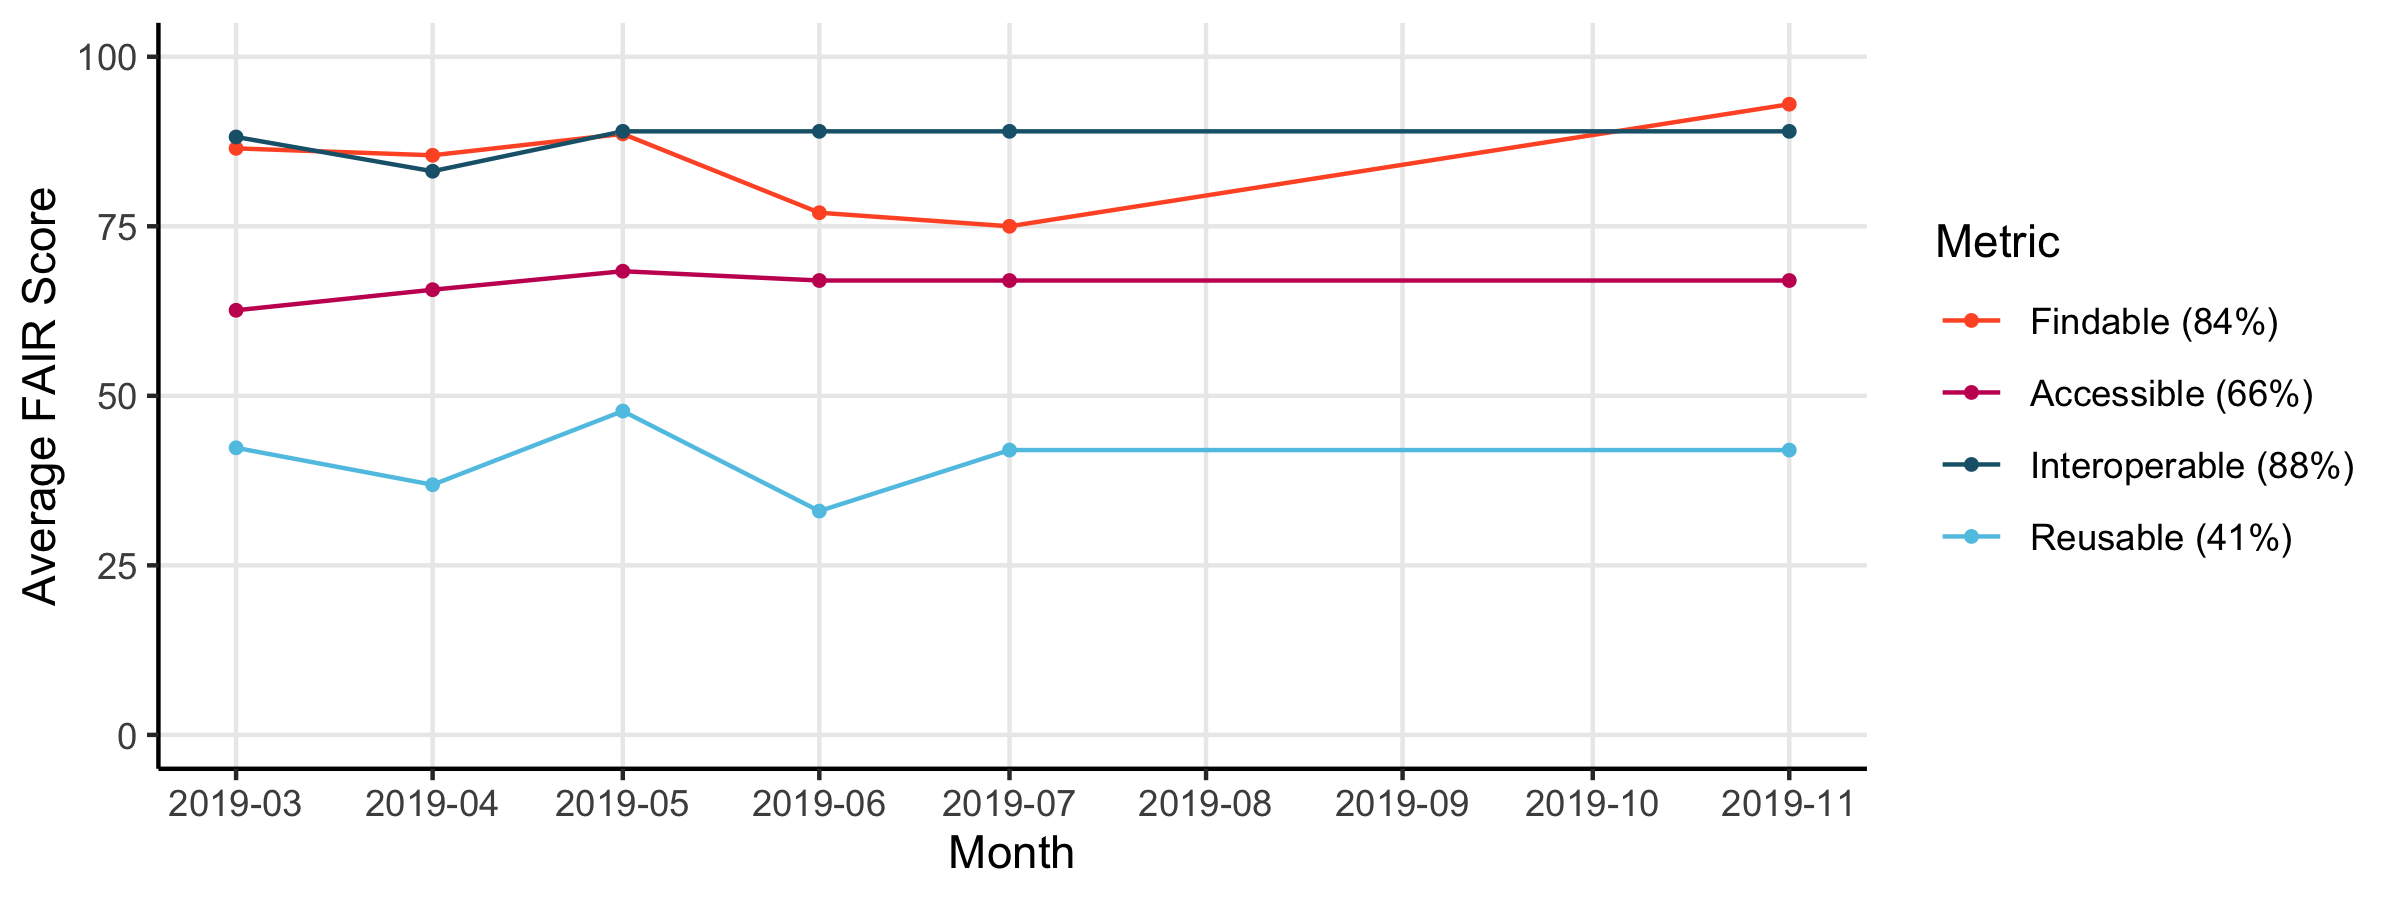 A colorful timeseries chart with a legend. The line chart includes one line for each of the four FAIR metrics (Findability, Accessibility, Interoperability, and Reusability) showing changes in scores per month. The legend indicates the current score for each metric as a percentage.